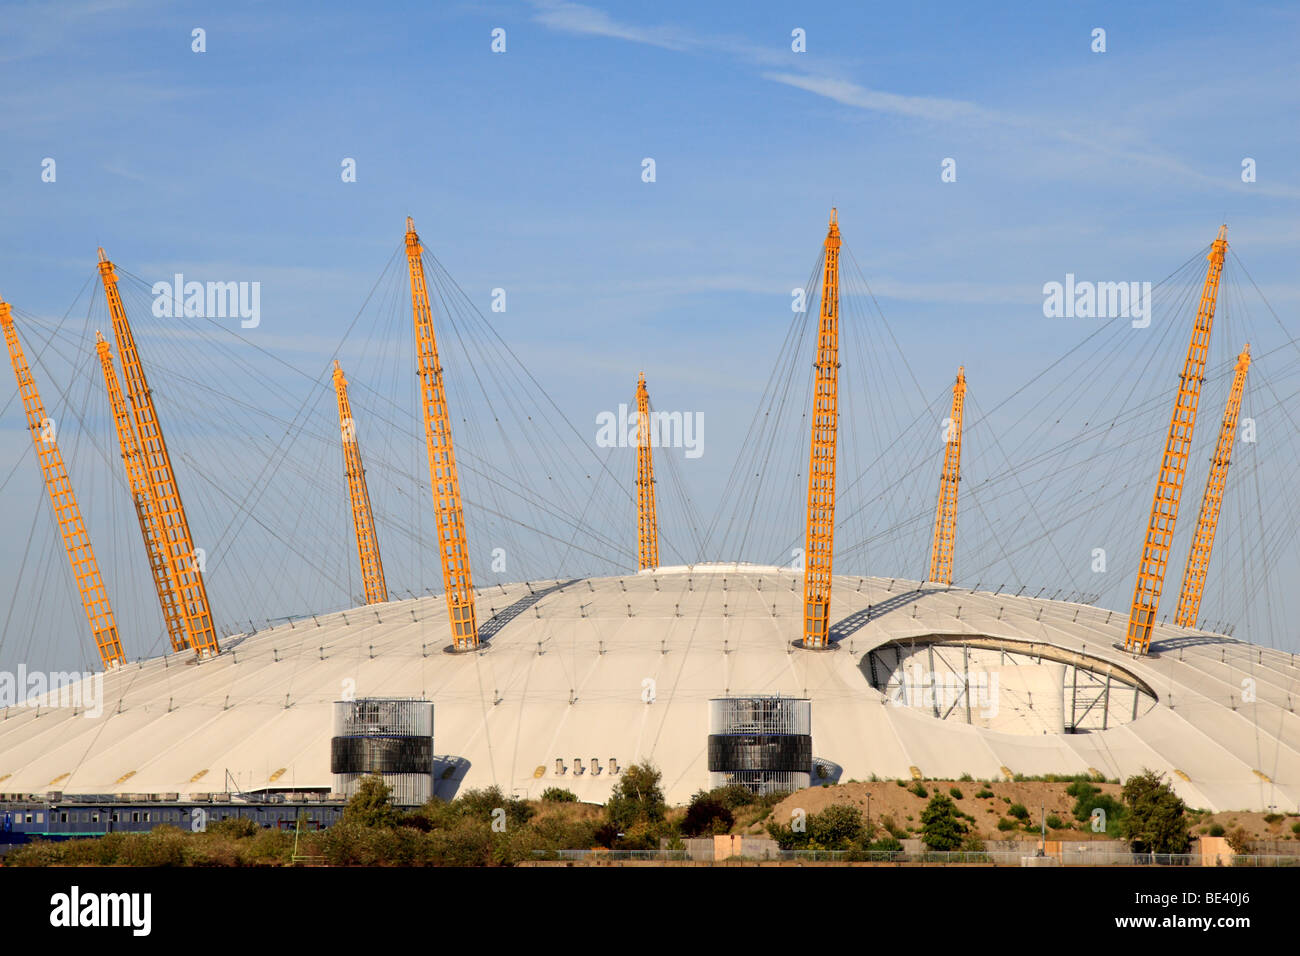 The O2 dome (formerly the Millennium Dome) in London Docklands, North Greenwich, UK.  As viewed from the Isle of Dogs. Stock Photo